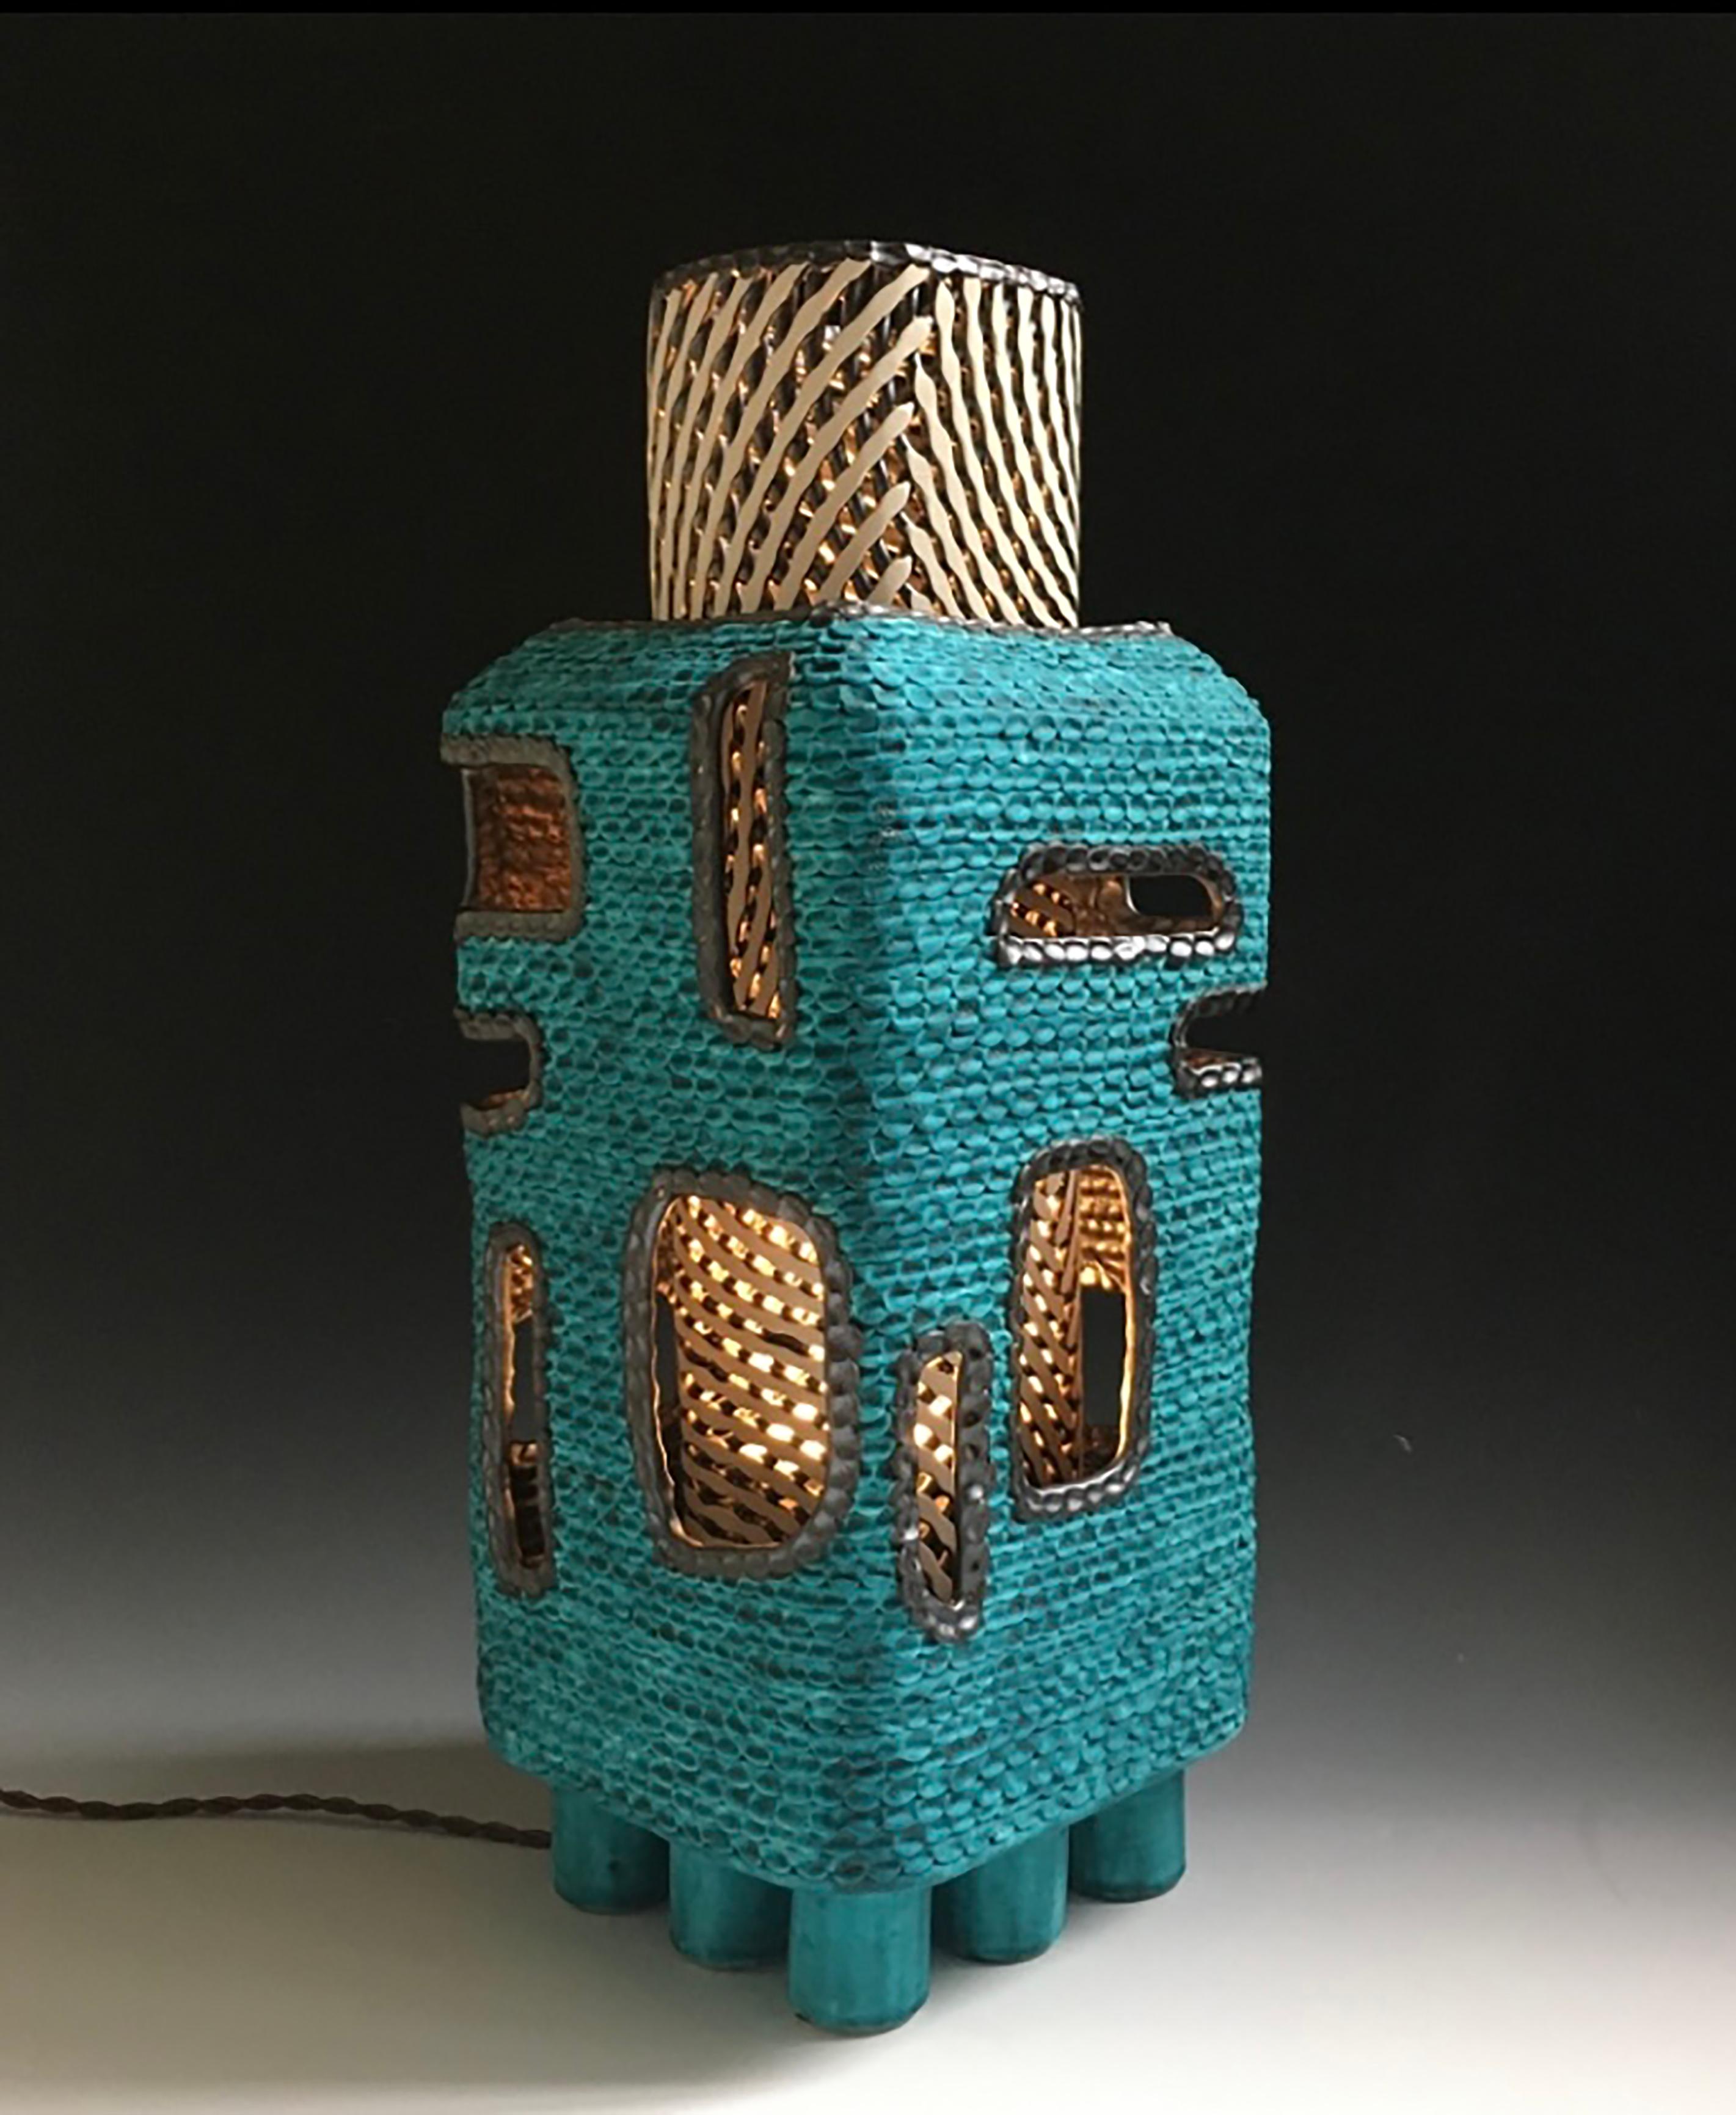 Turquoise Lantern has two parts, the outer shell and the insert. The outer shell is 